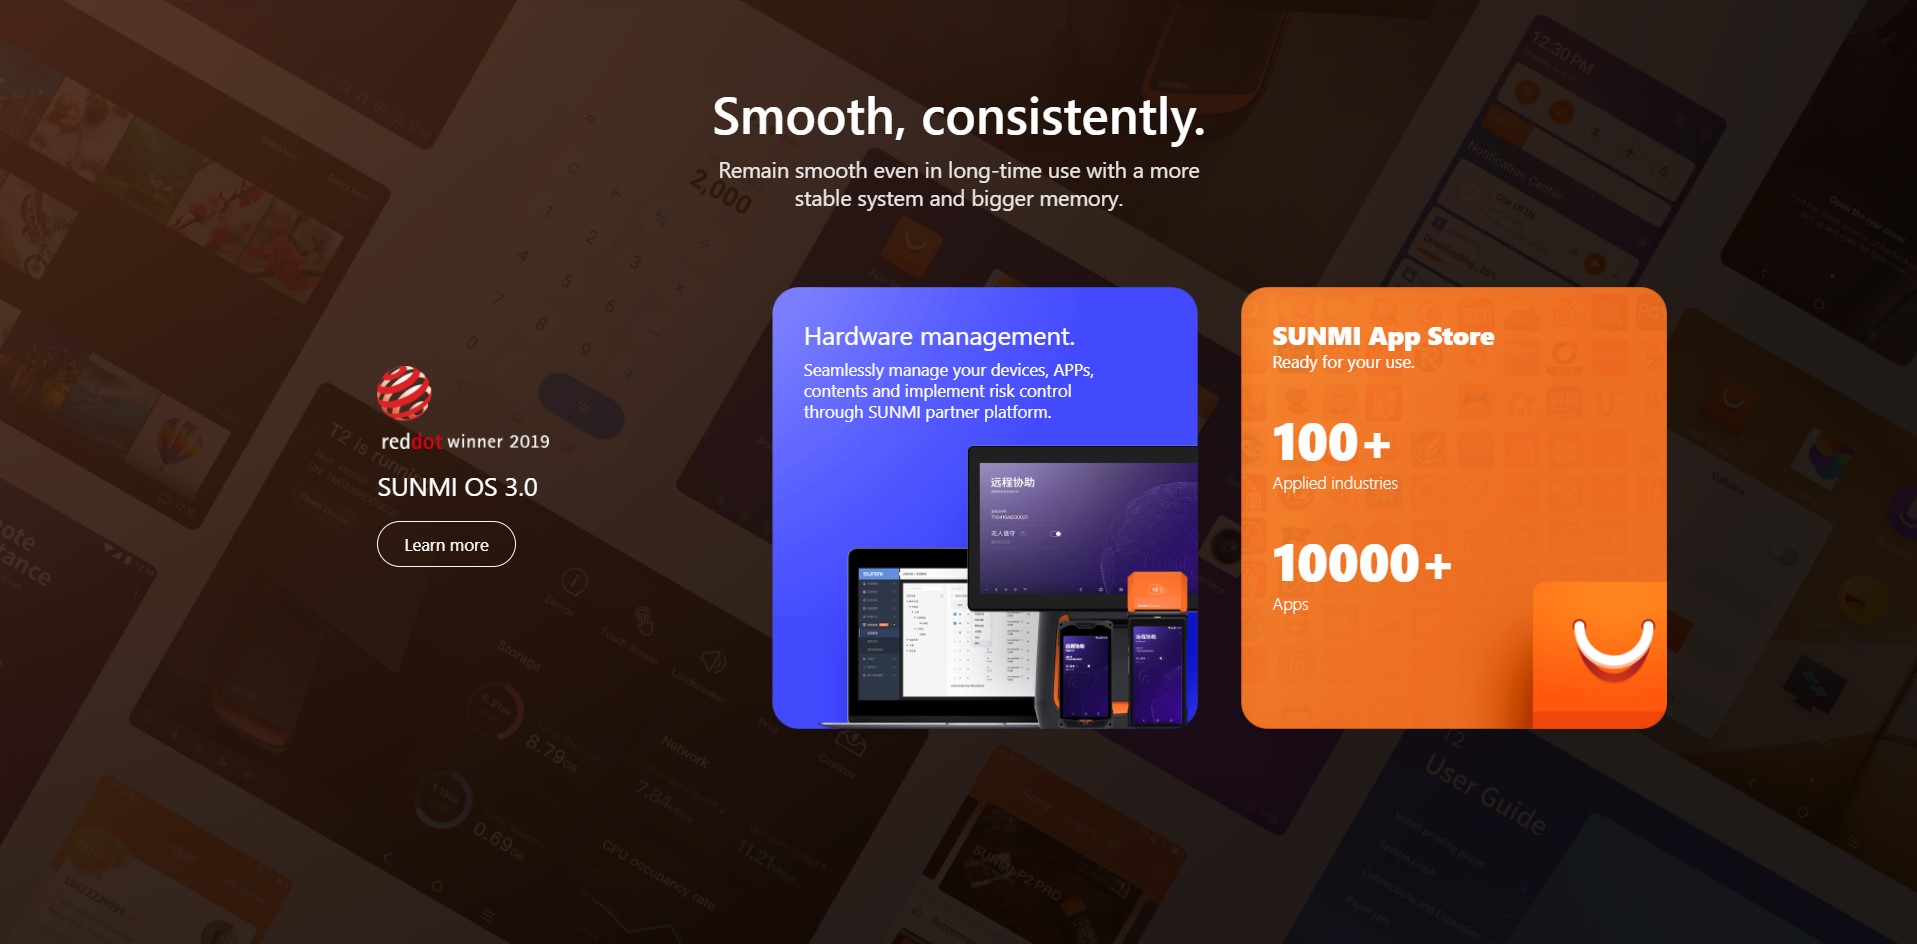 Smooth, consistently. Remain smooth even in long-time use with a more stable system and bigger memory. | SUNMI OS 3.0 | Hardware management. Seamlessly manage your devices, APPs, contents and implement risk control through SUNMI partner platform. | SUNMI App Store Ready for your use. 100+ Applied industries 10000+ Apps